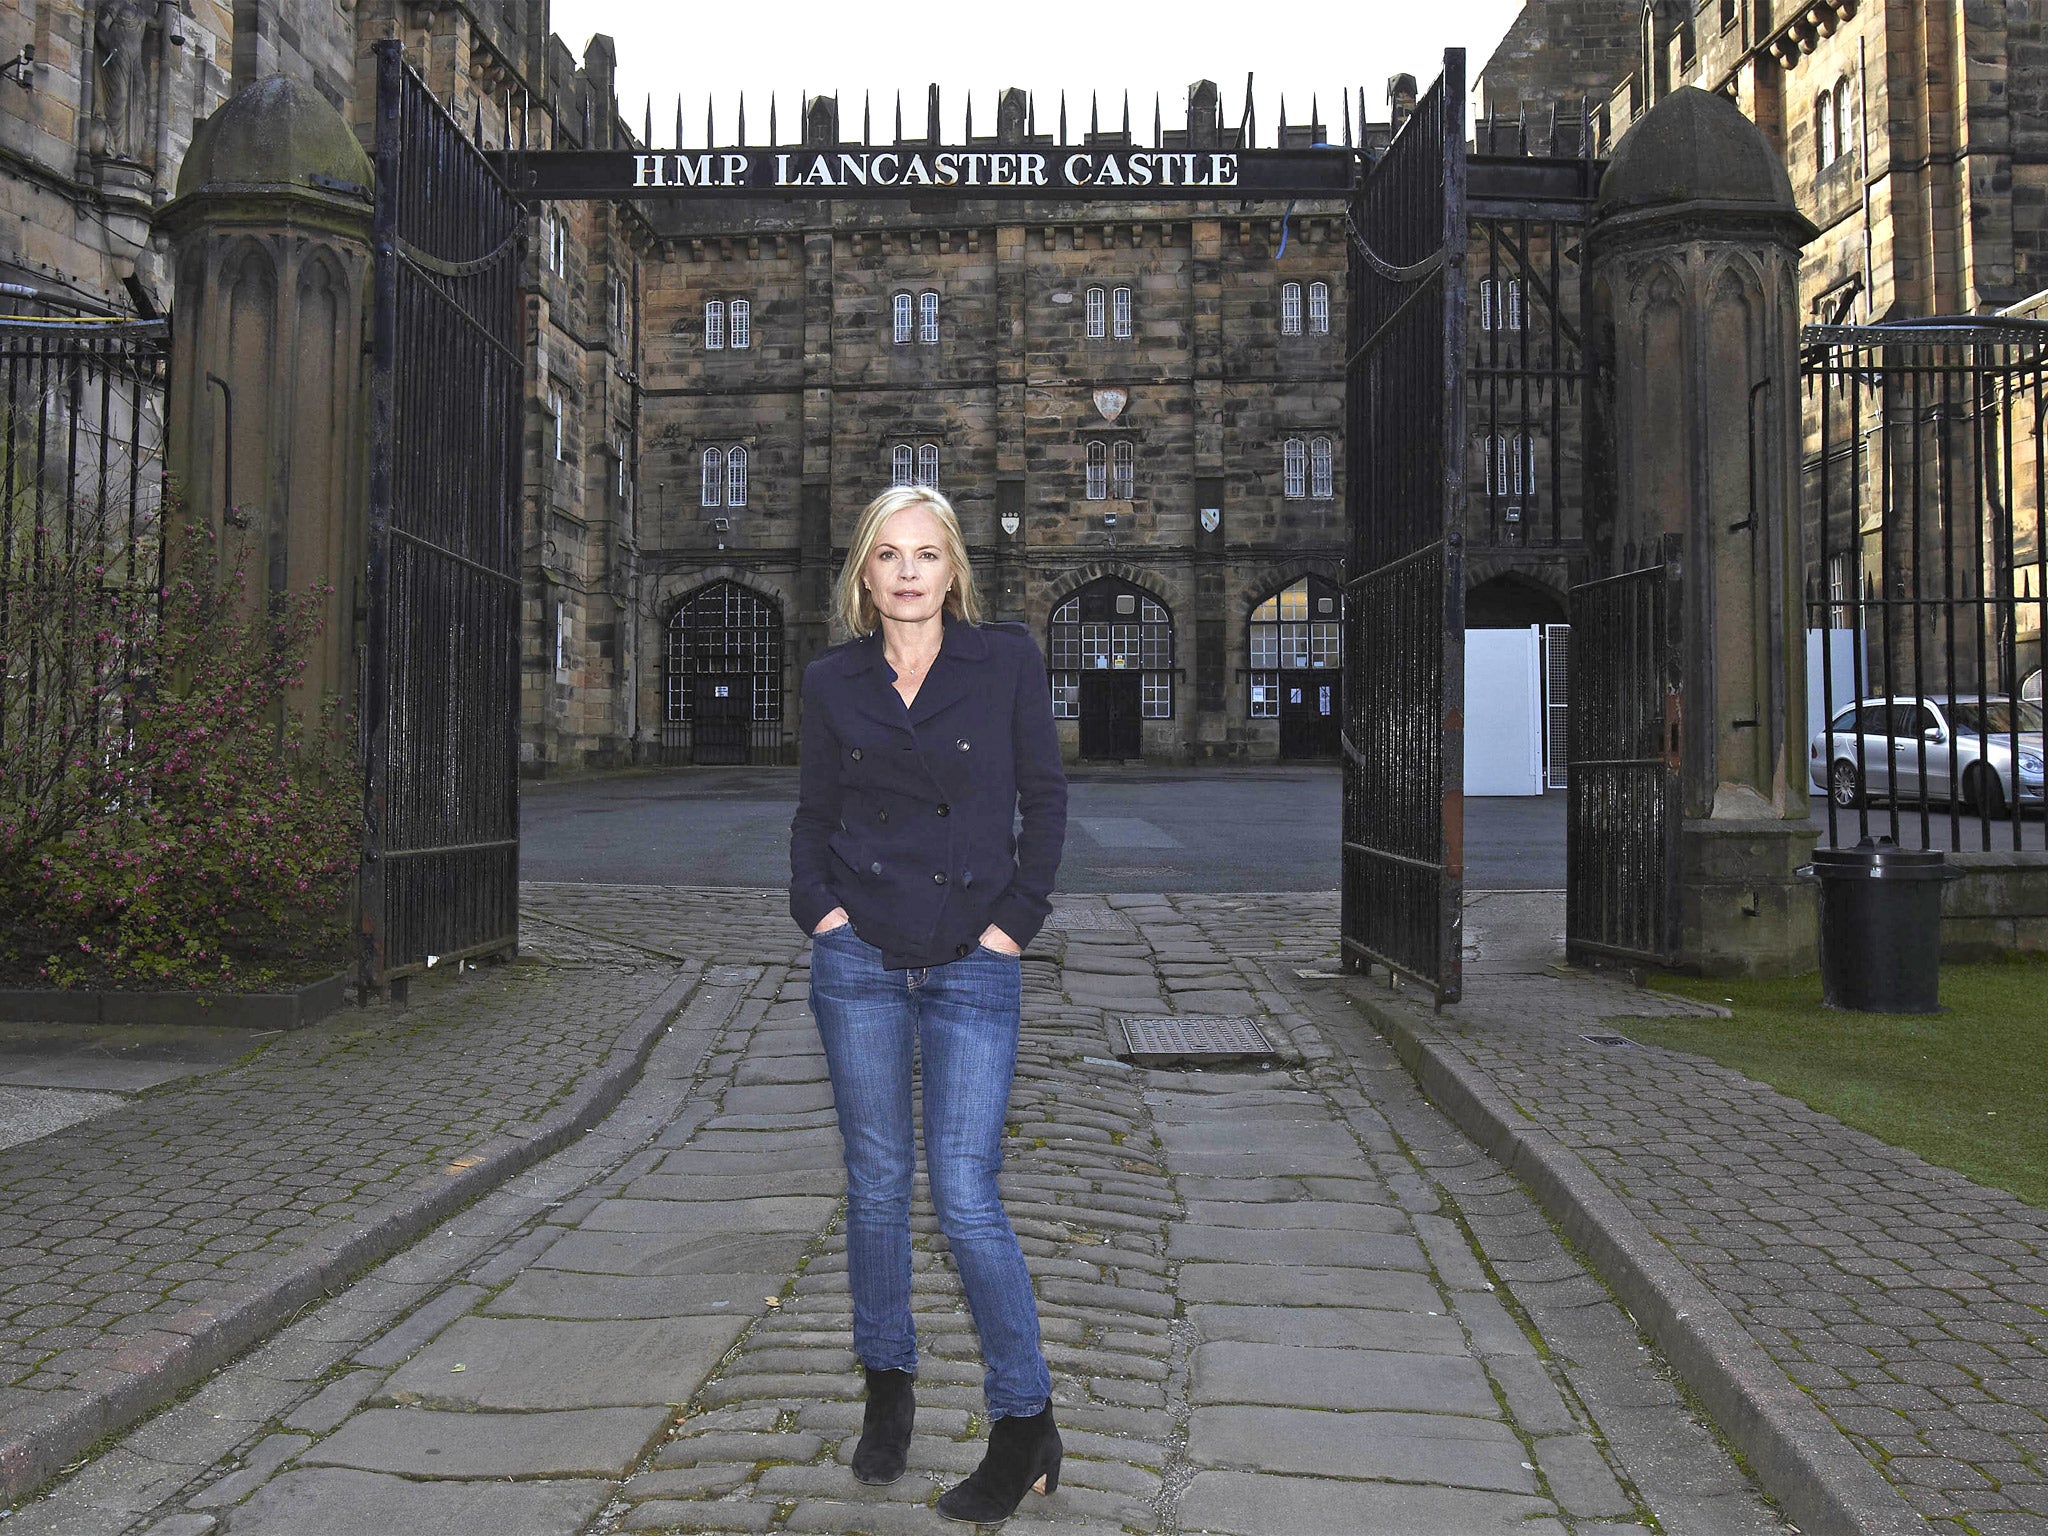 Inside information: Mariella Frostrup discovered more about her great-great-grandfather's incarceration in HMP Lancaster Castle in ‘Secrets from the Clink’